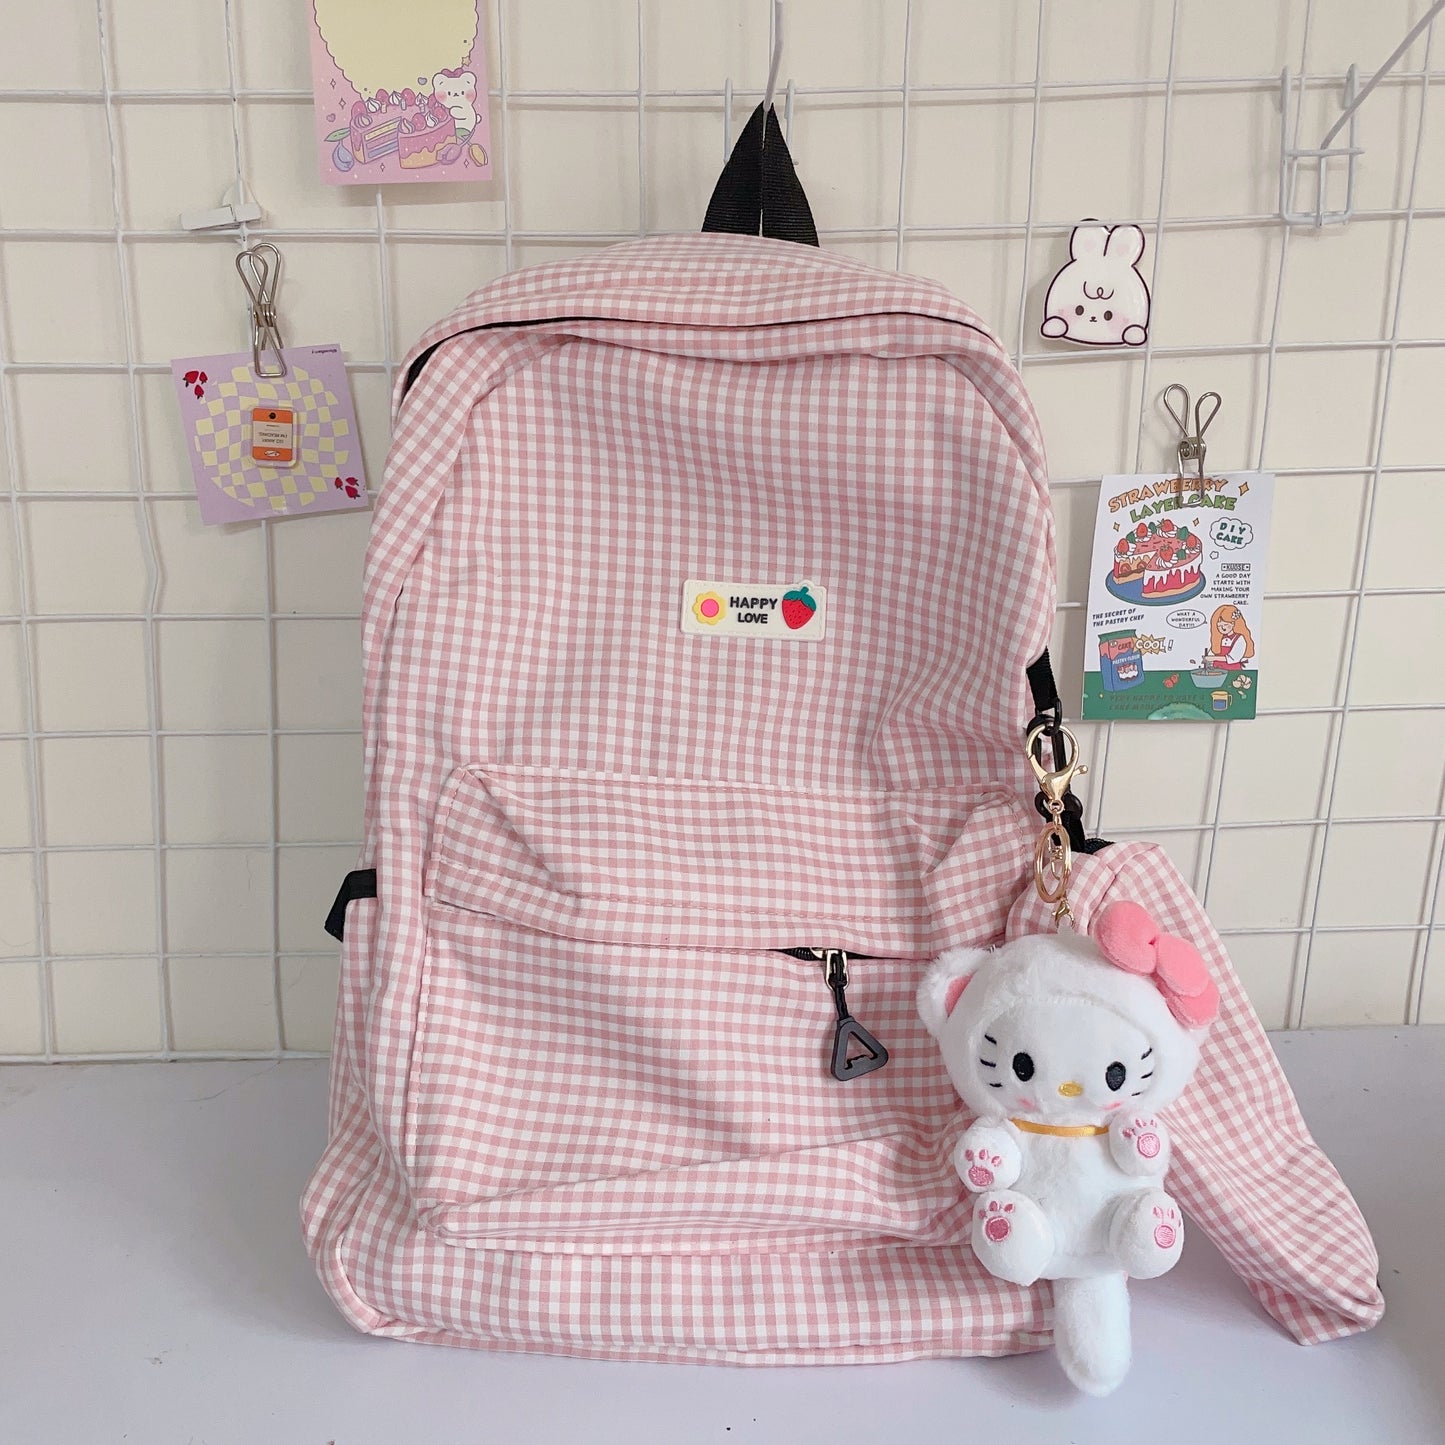 Ghingham Hello Kitty Backpack with pouch